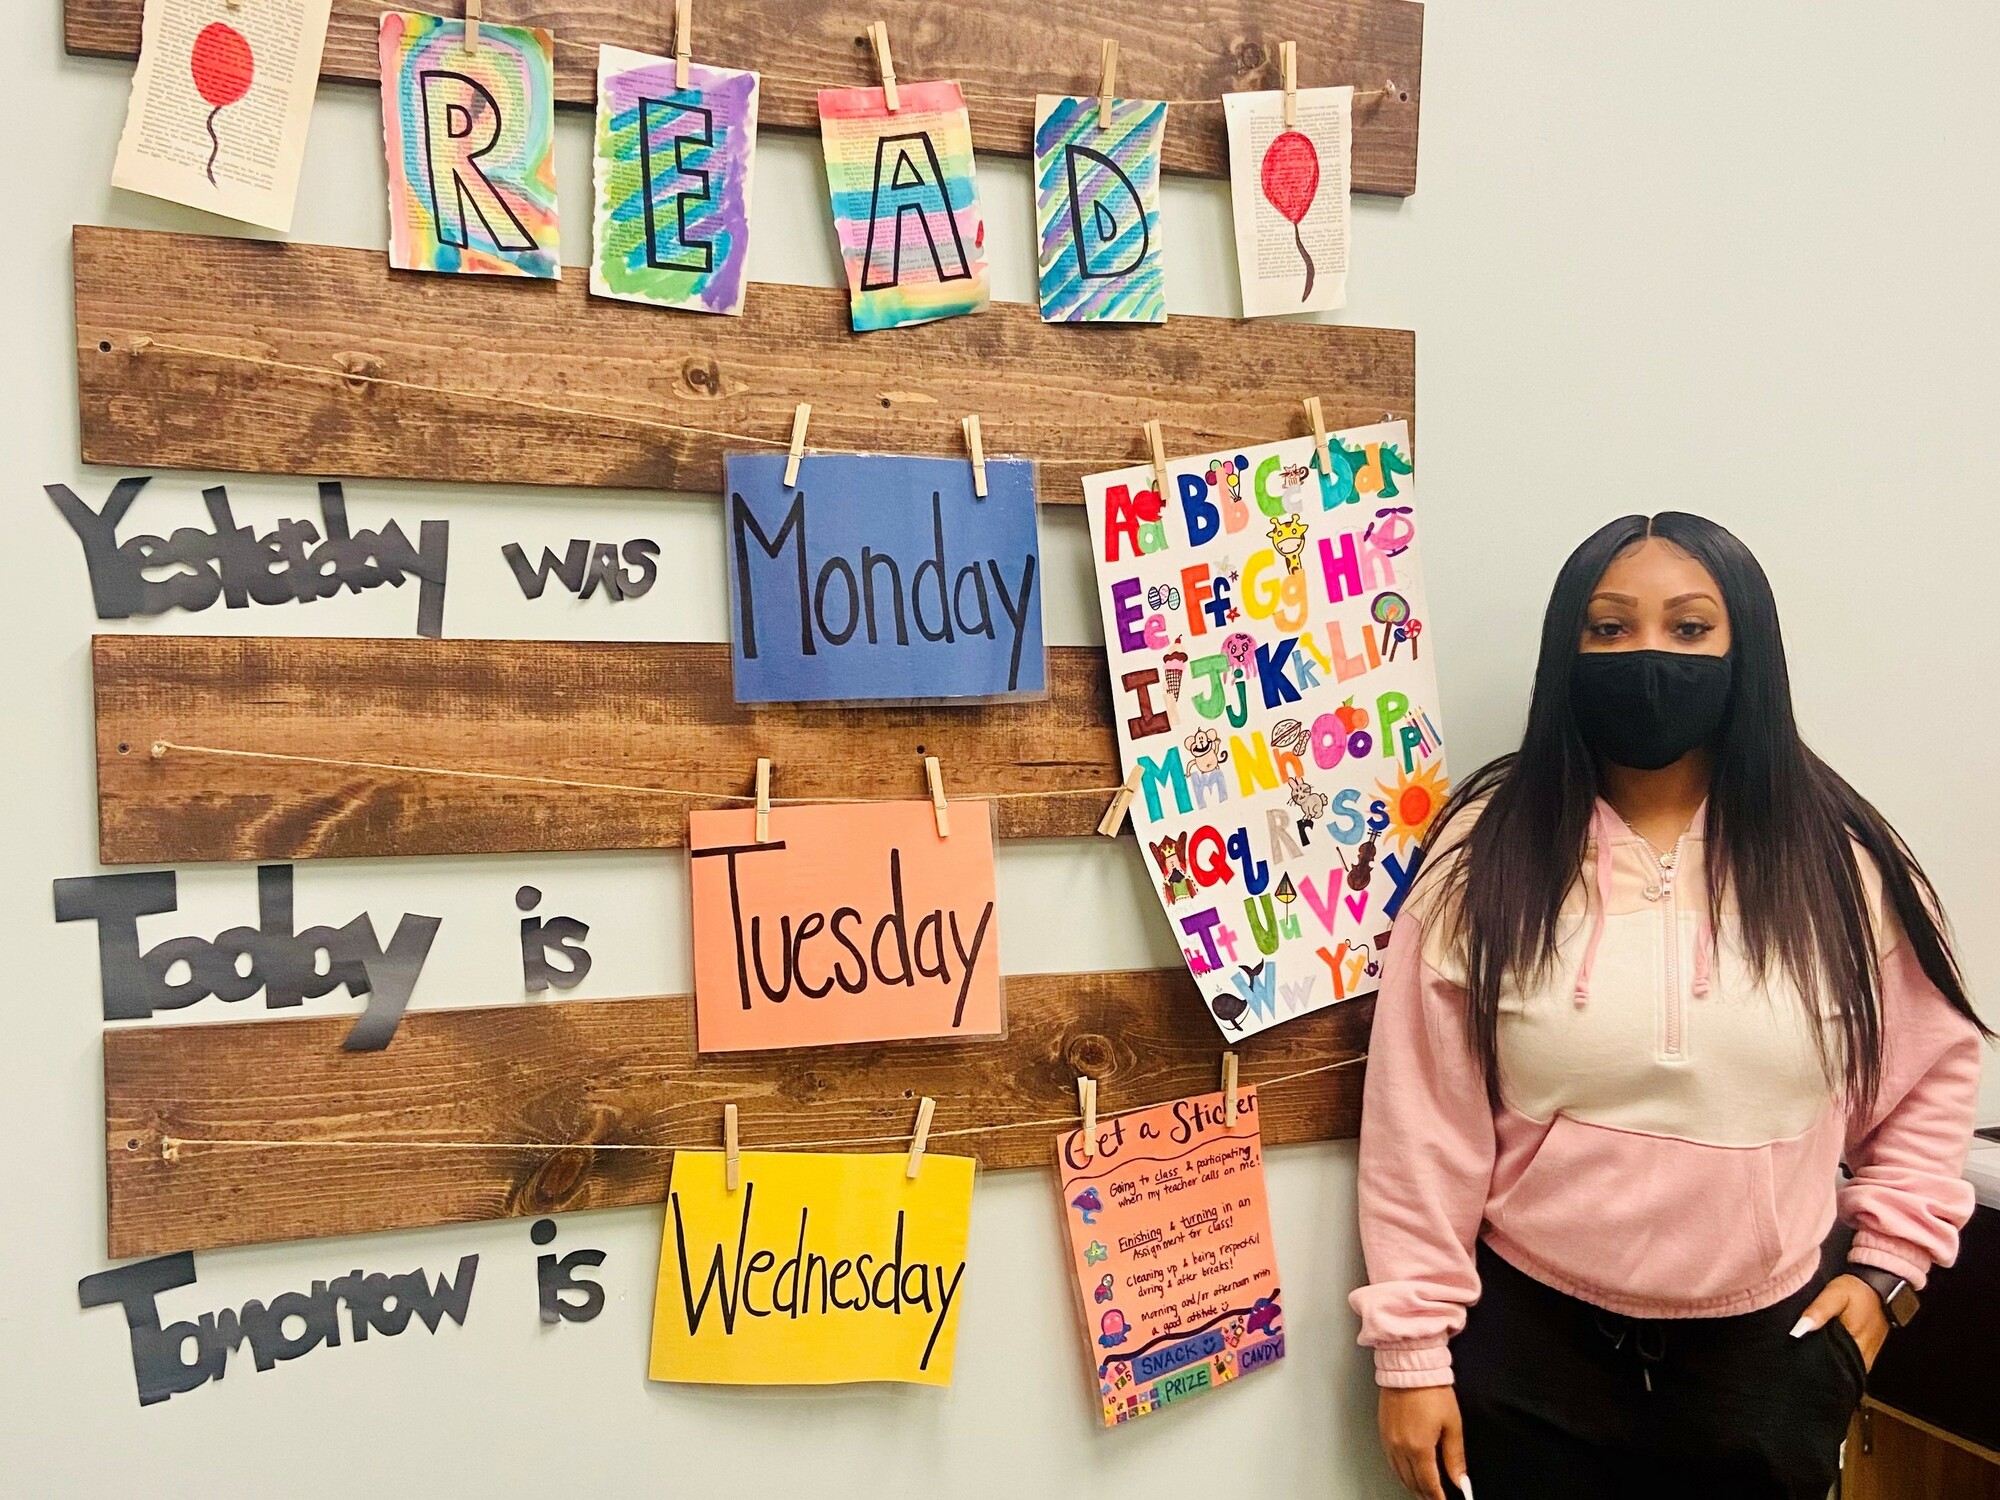 A young woman in a face mask stands next to a wall covered with colorful learning materials in a classroom